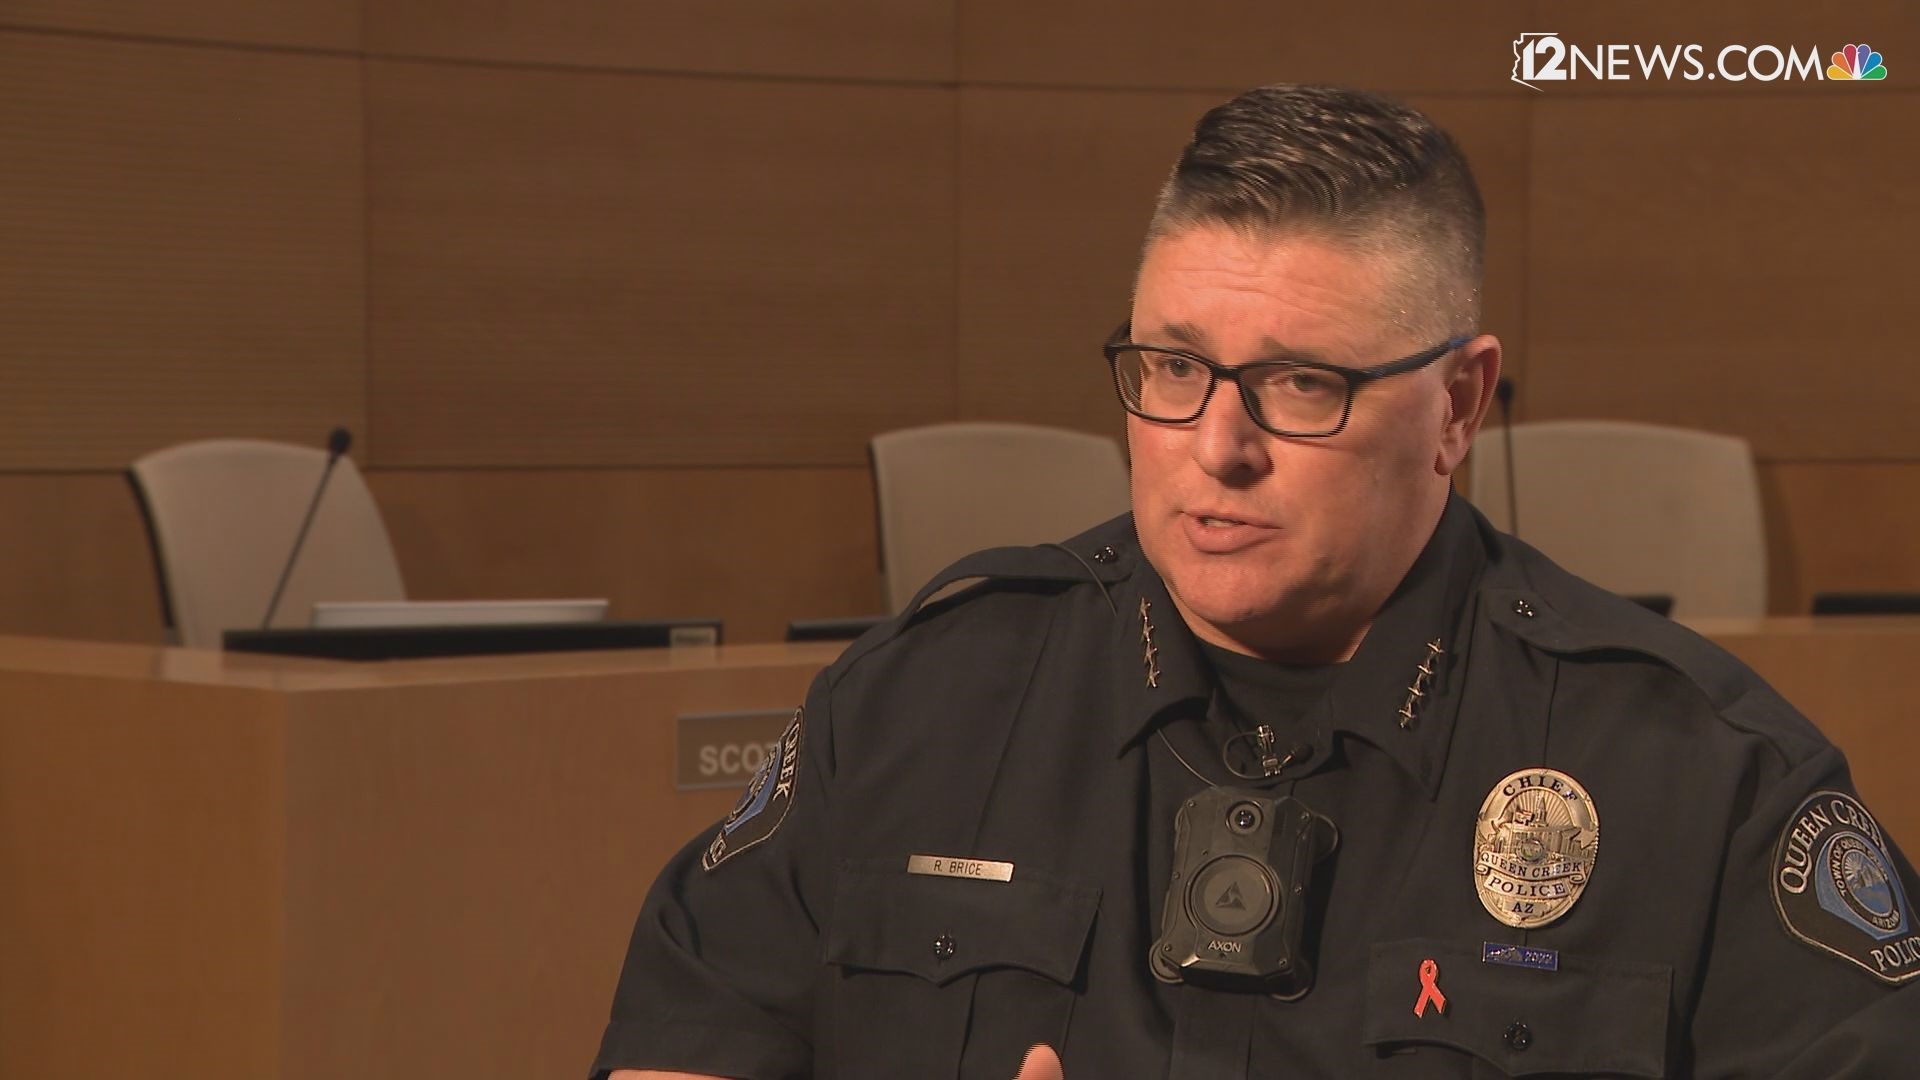 Queen Creek police chief Randy Brice sat down with 12News to discuss the latest in teen violence arrests and the Preston Lord murder investigation.